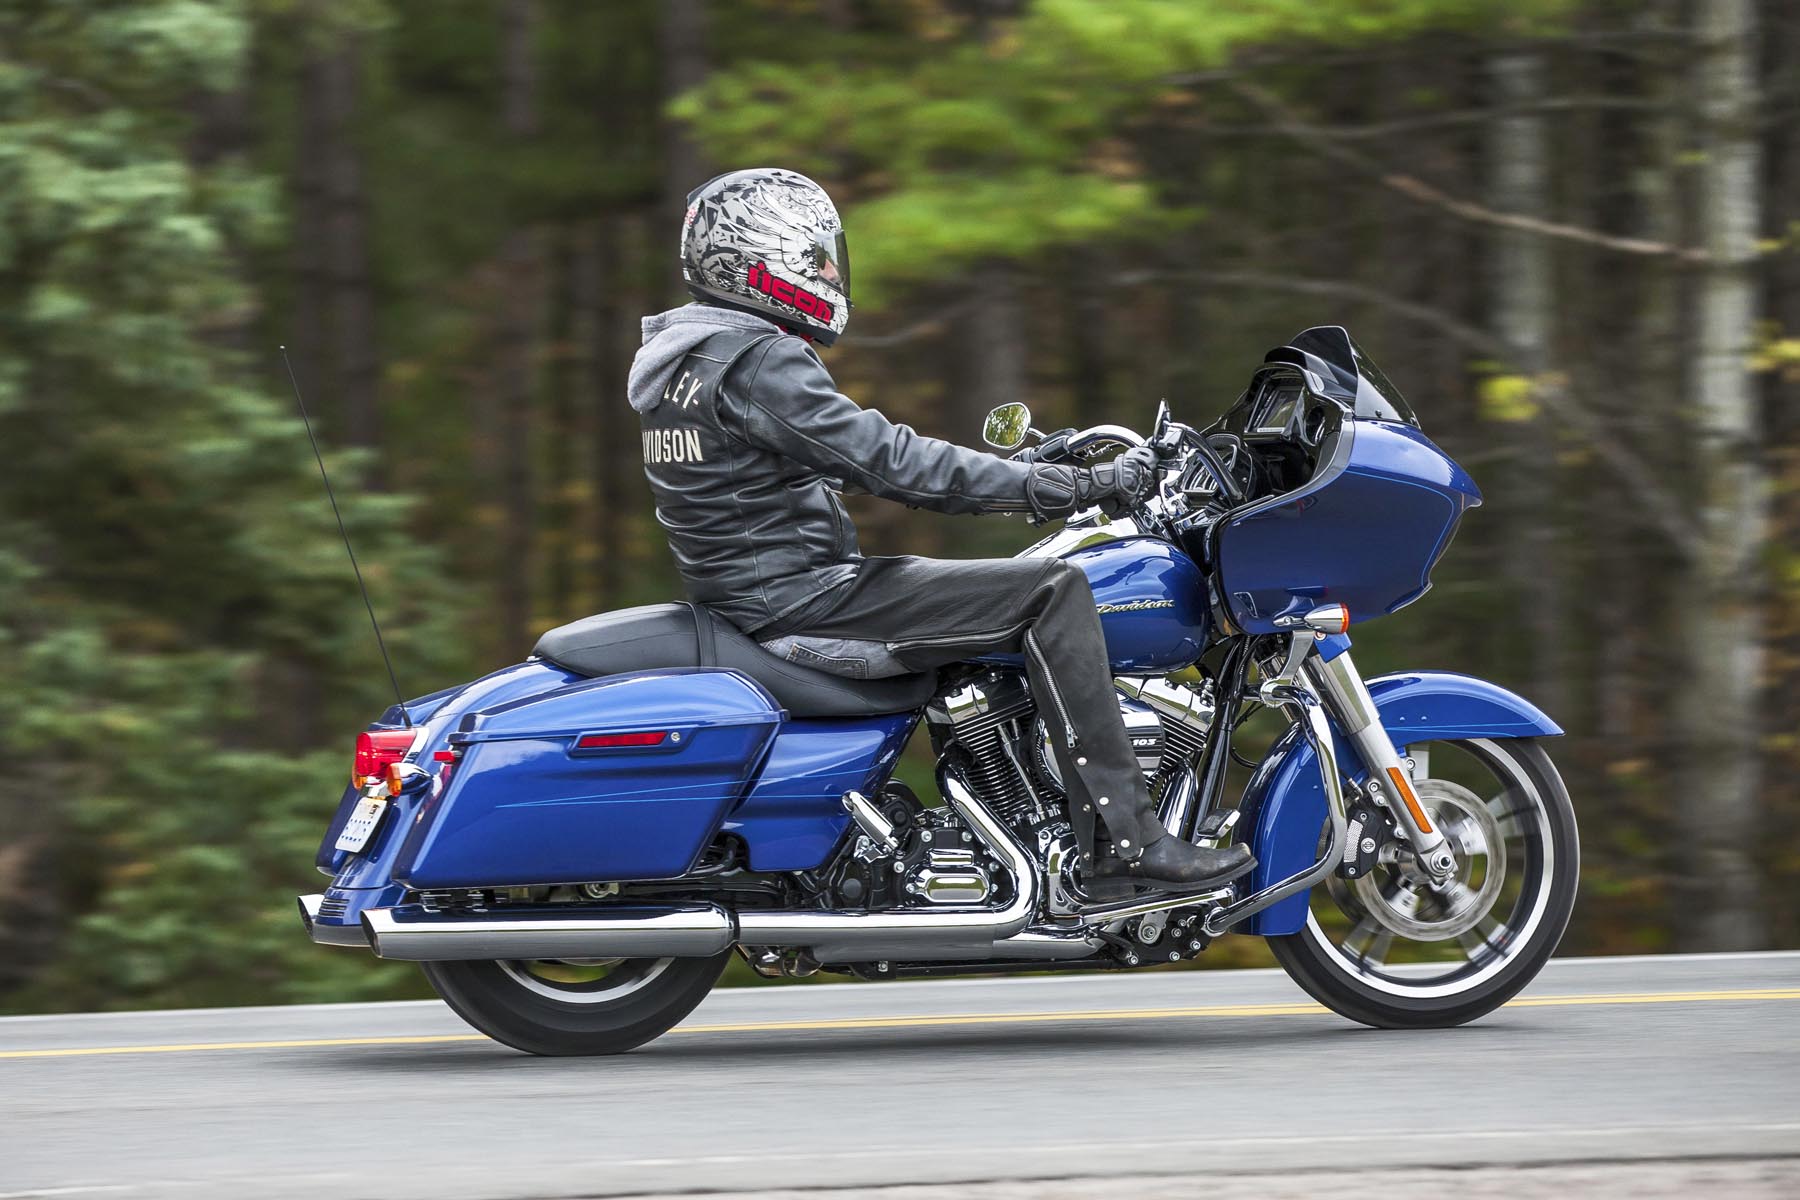 Enhancements for the 2015 Road Glide include the upgraded High Output Twin Cam 103 engine. The lightweight piston design and higher compression ratio increases efficiency and horsepower, improved airflow and upgraded cam optimize low-end torque while twin cooling of the heads and exhaust ports allow for the delivery of peak performance at higher temperatures. Harley is notorious for not posting horsepower numbers but the 1,690cc displacement powerplant with integrated oil cooler boasts 105 ft-lbs. of torque at 3,250 rpm. It pulls harder, sounds better and runs cooler. 